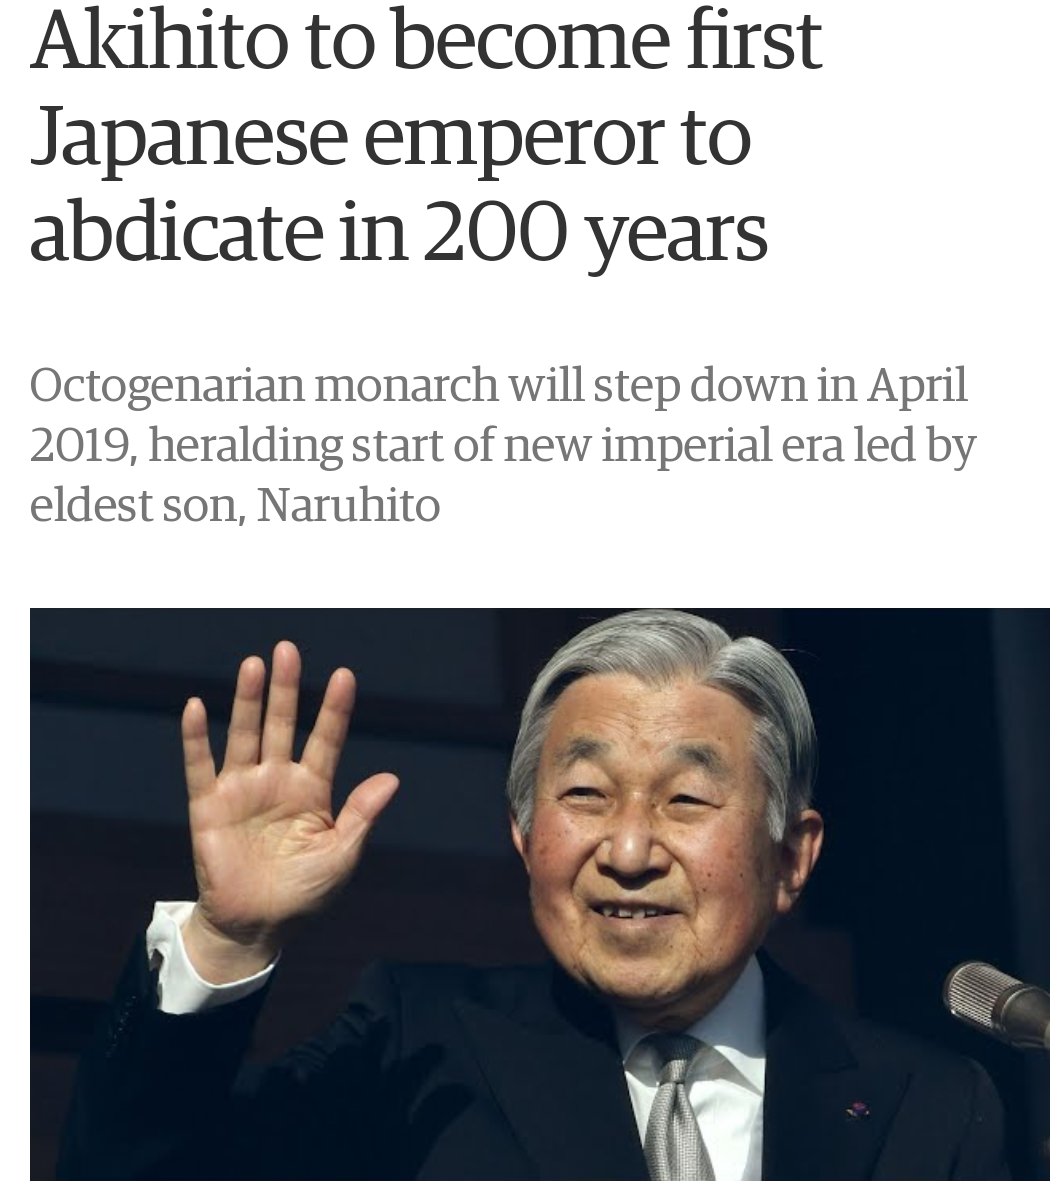 emperor akihito - Akihito to become first Japanese emperor to abdicate in 200 years Octogenarian monarch will step down in , heralding start of new imperial era led by eldest son, Naruhito